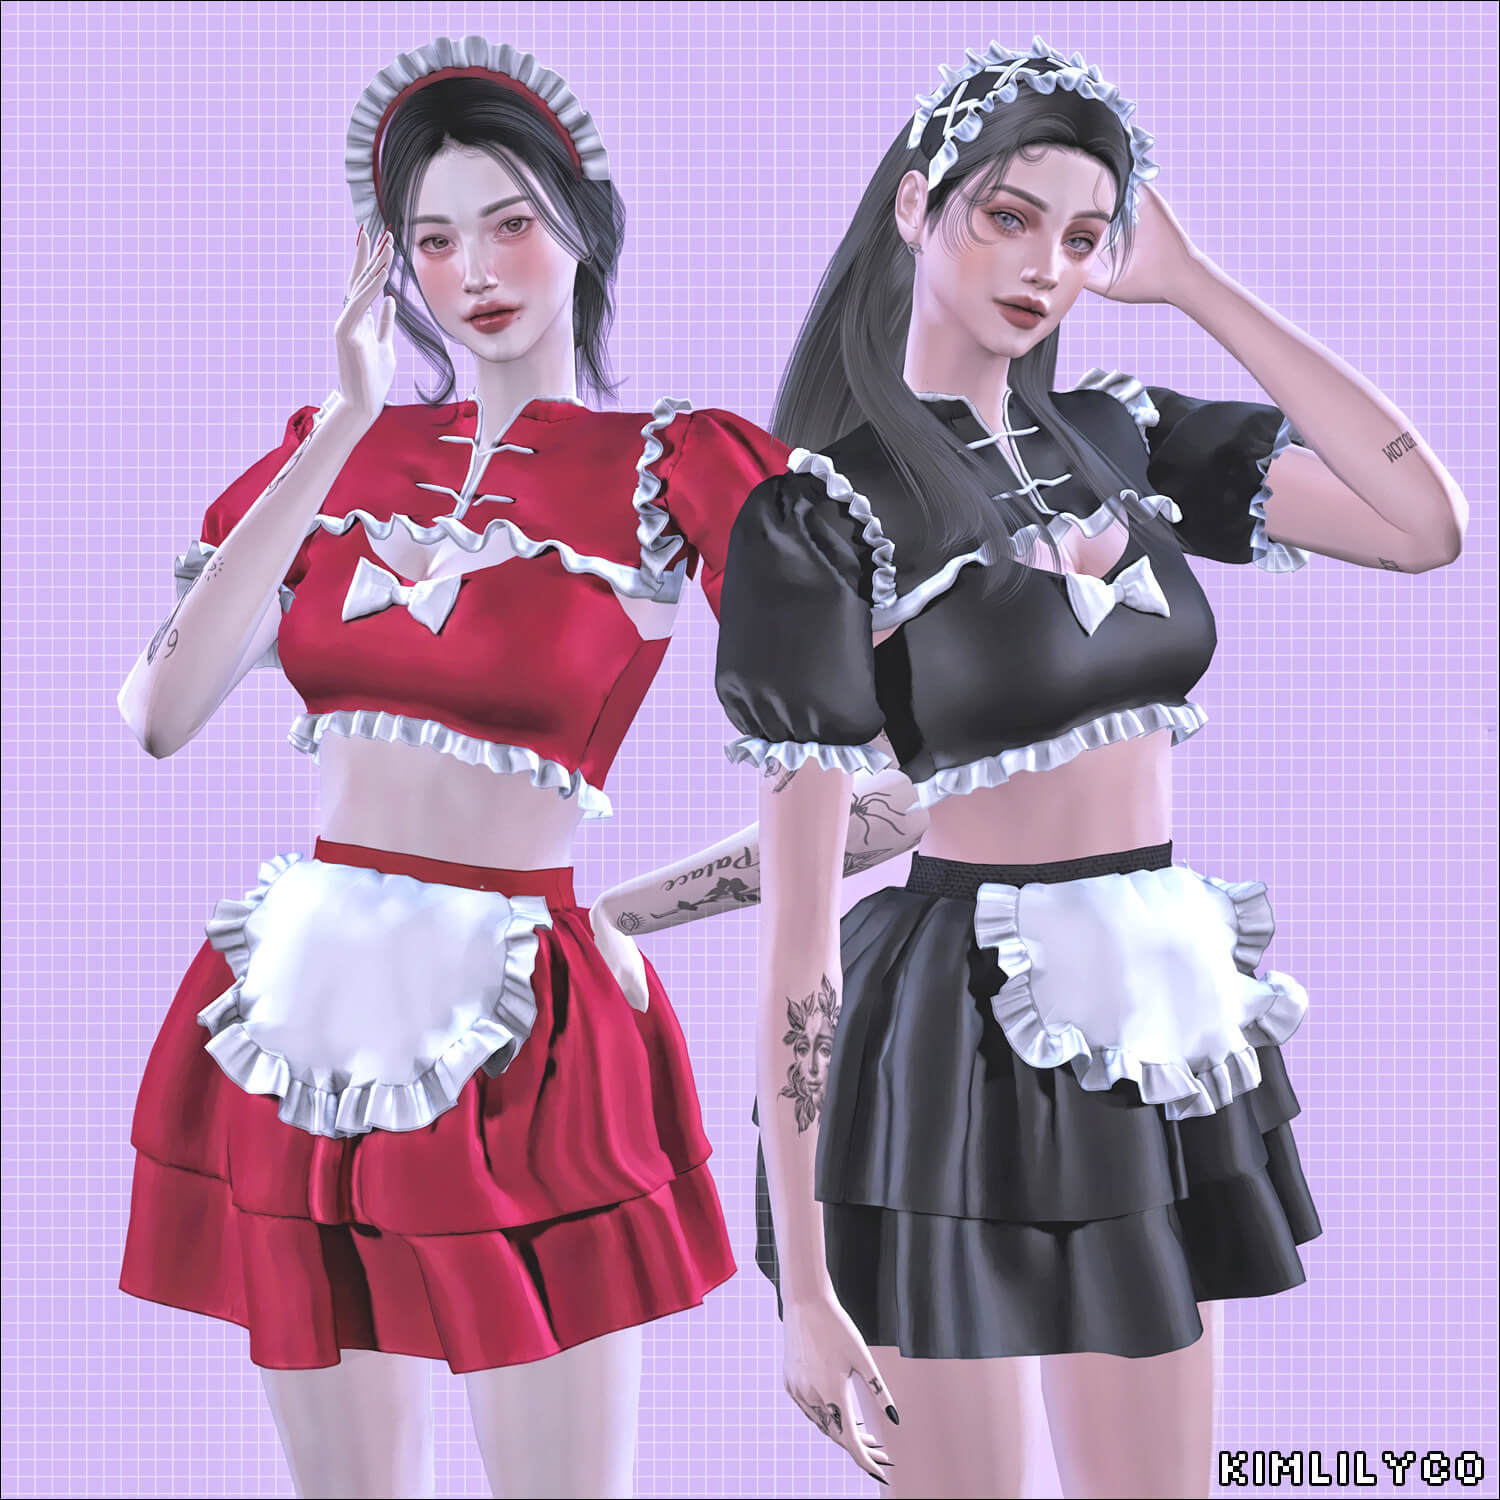 The Sims 4 Maid Uniform Set Download The Sims Game